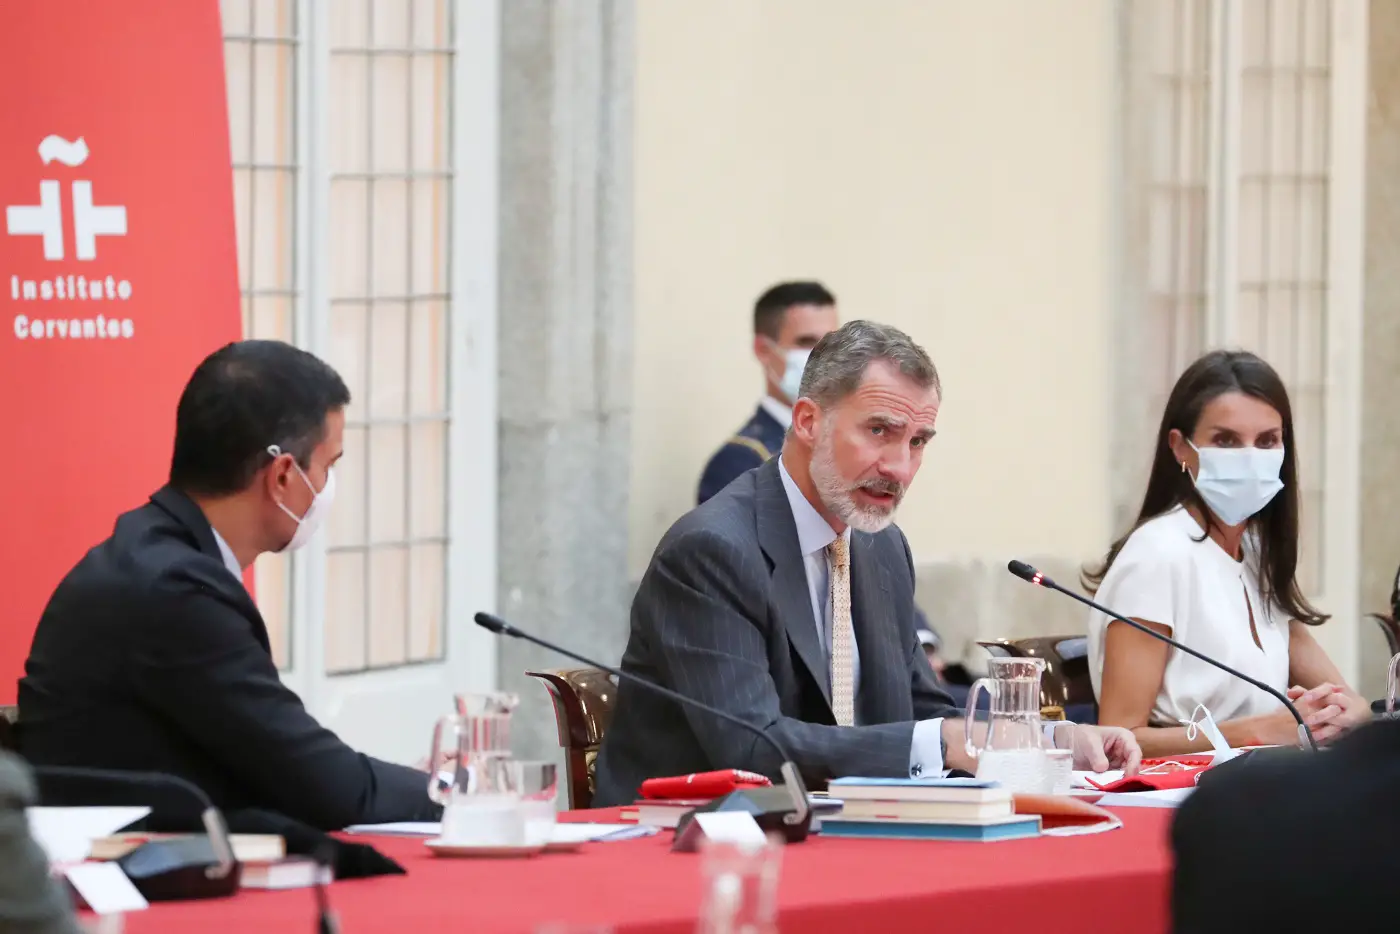 King felipe and Queen Letizia attended Cervantes meeting